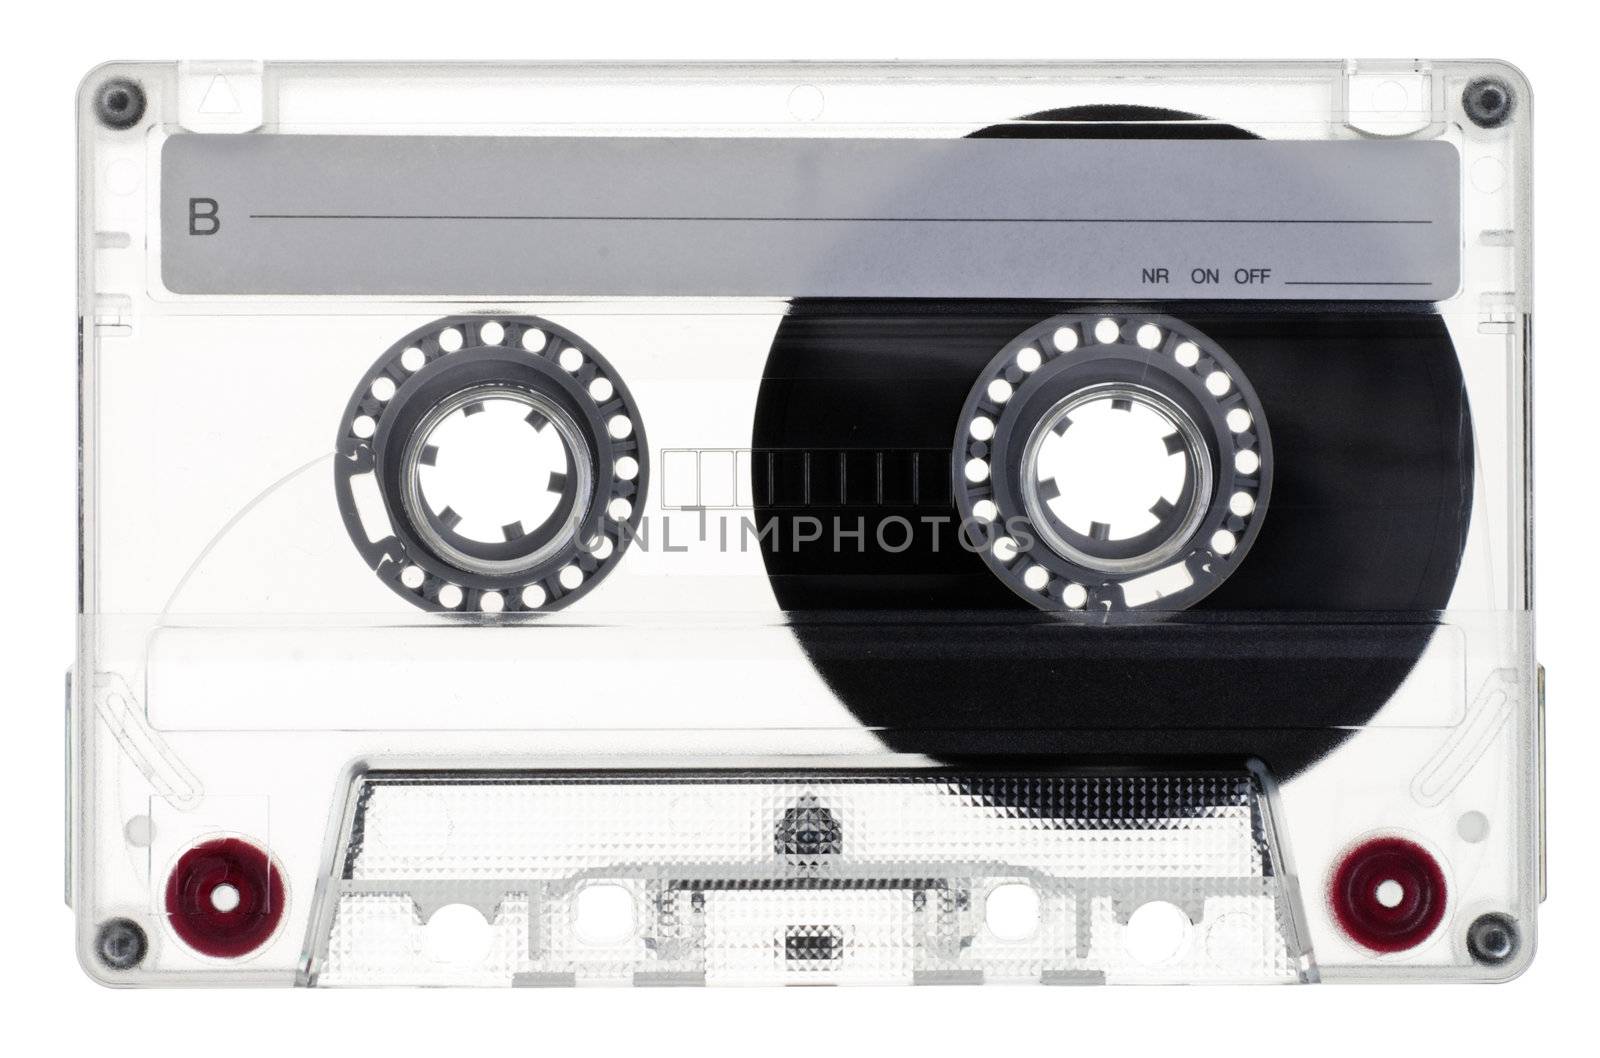 Compact Cassette by naumoid